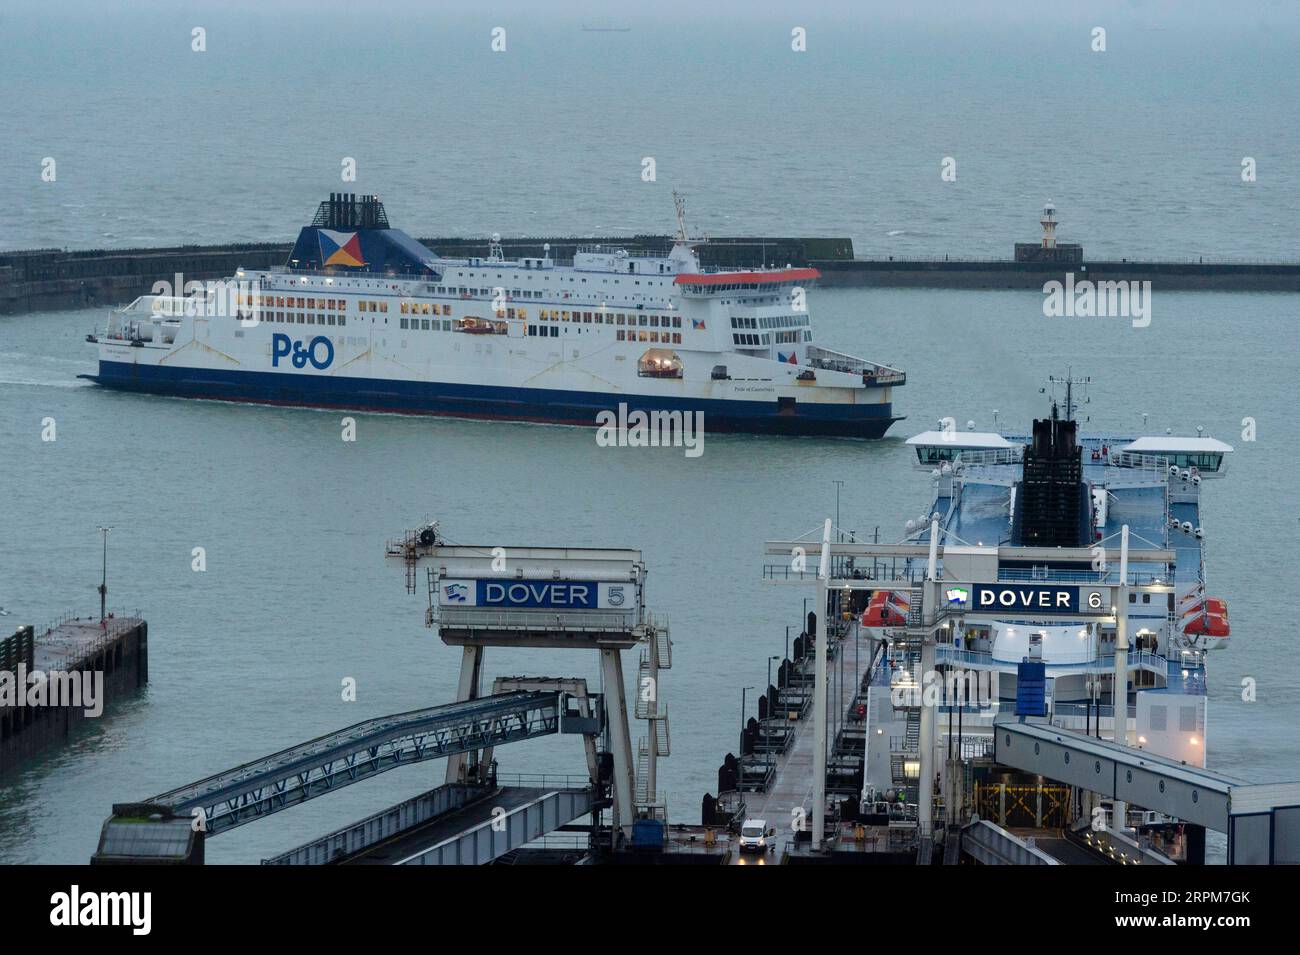 200201 -- DOVER, Feb. 1, 2020 -- A ferry arrives at the Port of Dovert on the first day after Brexit in Dover, Britain, Feb. 1, 2020. Britain officially left the European Union EU at 11 p.m. 2300 GMT Friday, putting an end to its 47-year-long membership of the world s largest trading bloc. Photo by Ray Tang/Xinhua BRITAIN-DOVER-PORT-AFTER BREXIT HanxYanRayTang PUBLICATIONxNOTxINxCHN Stock Photo